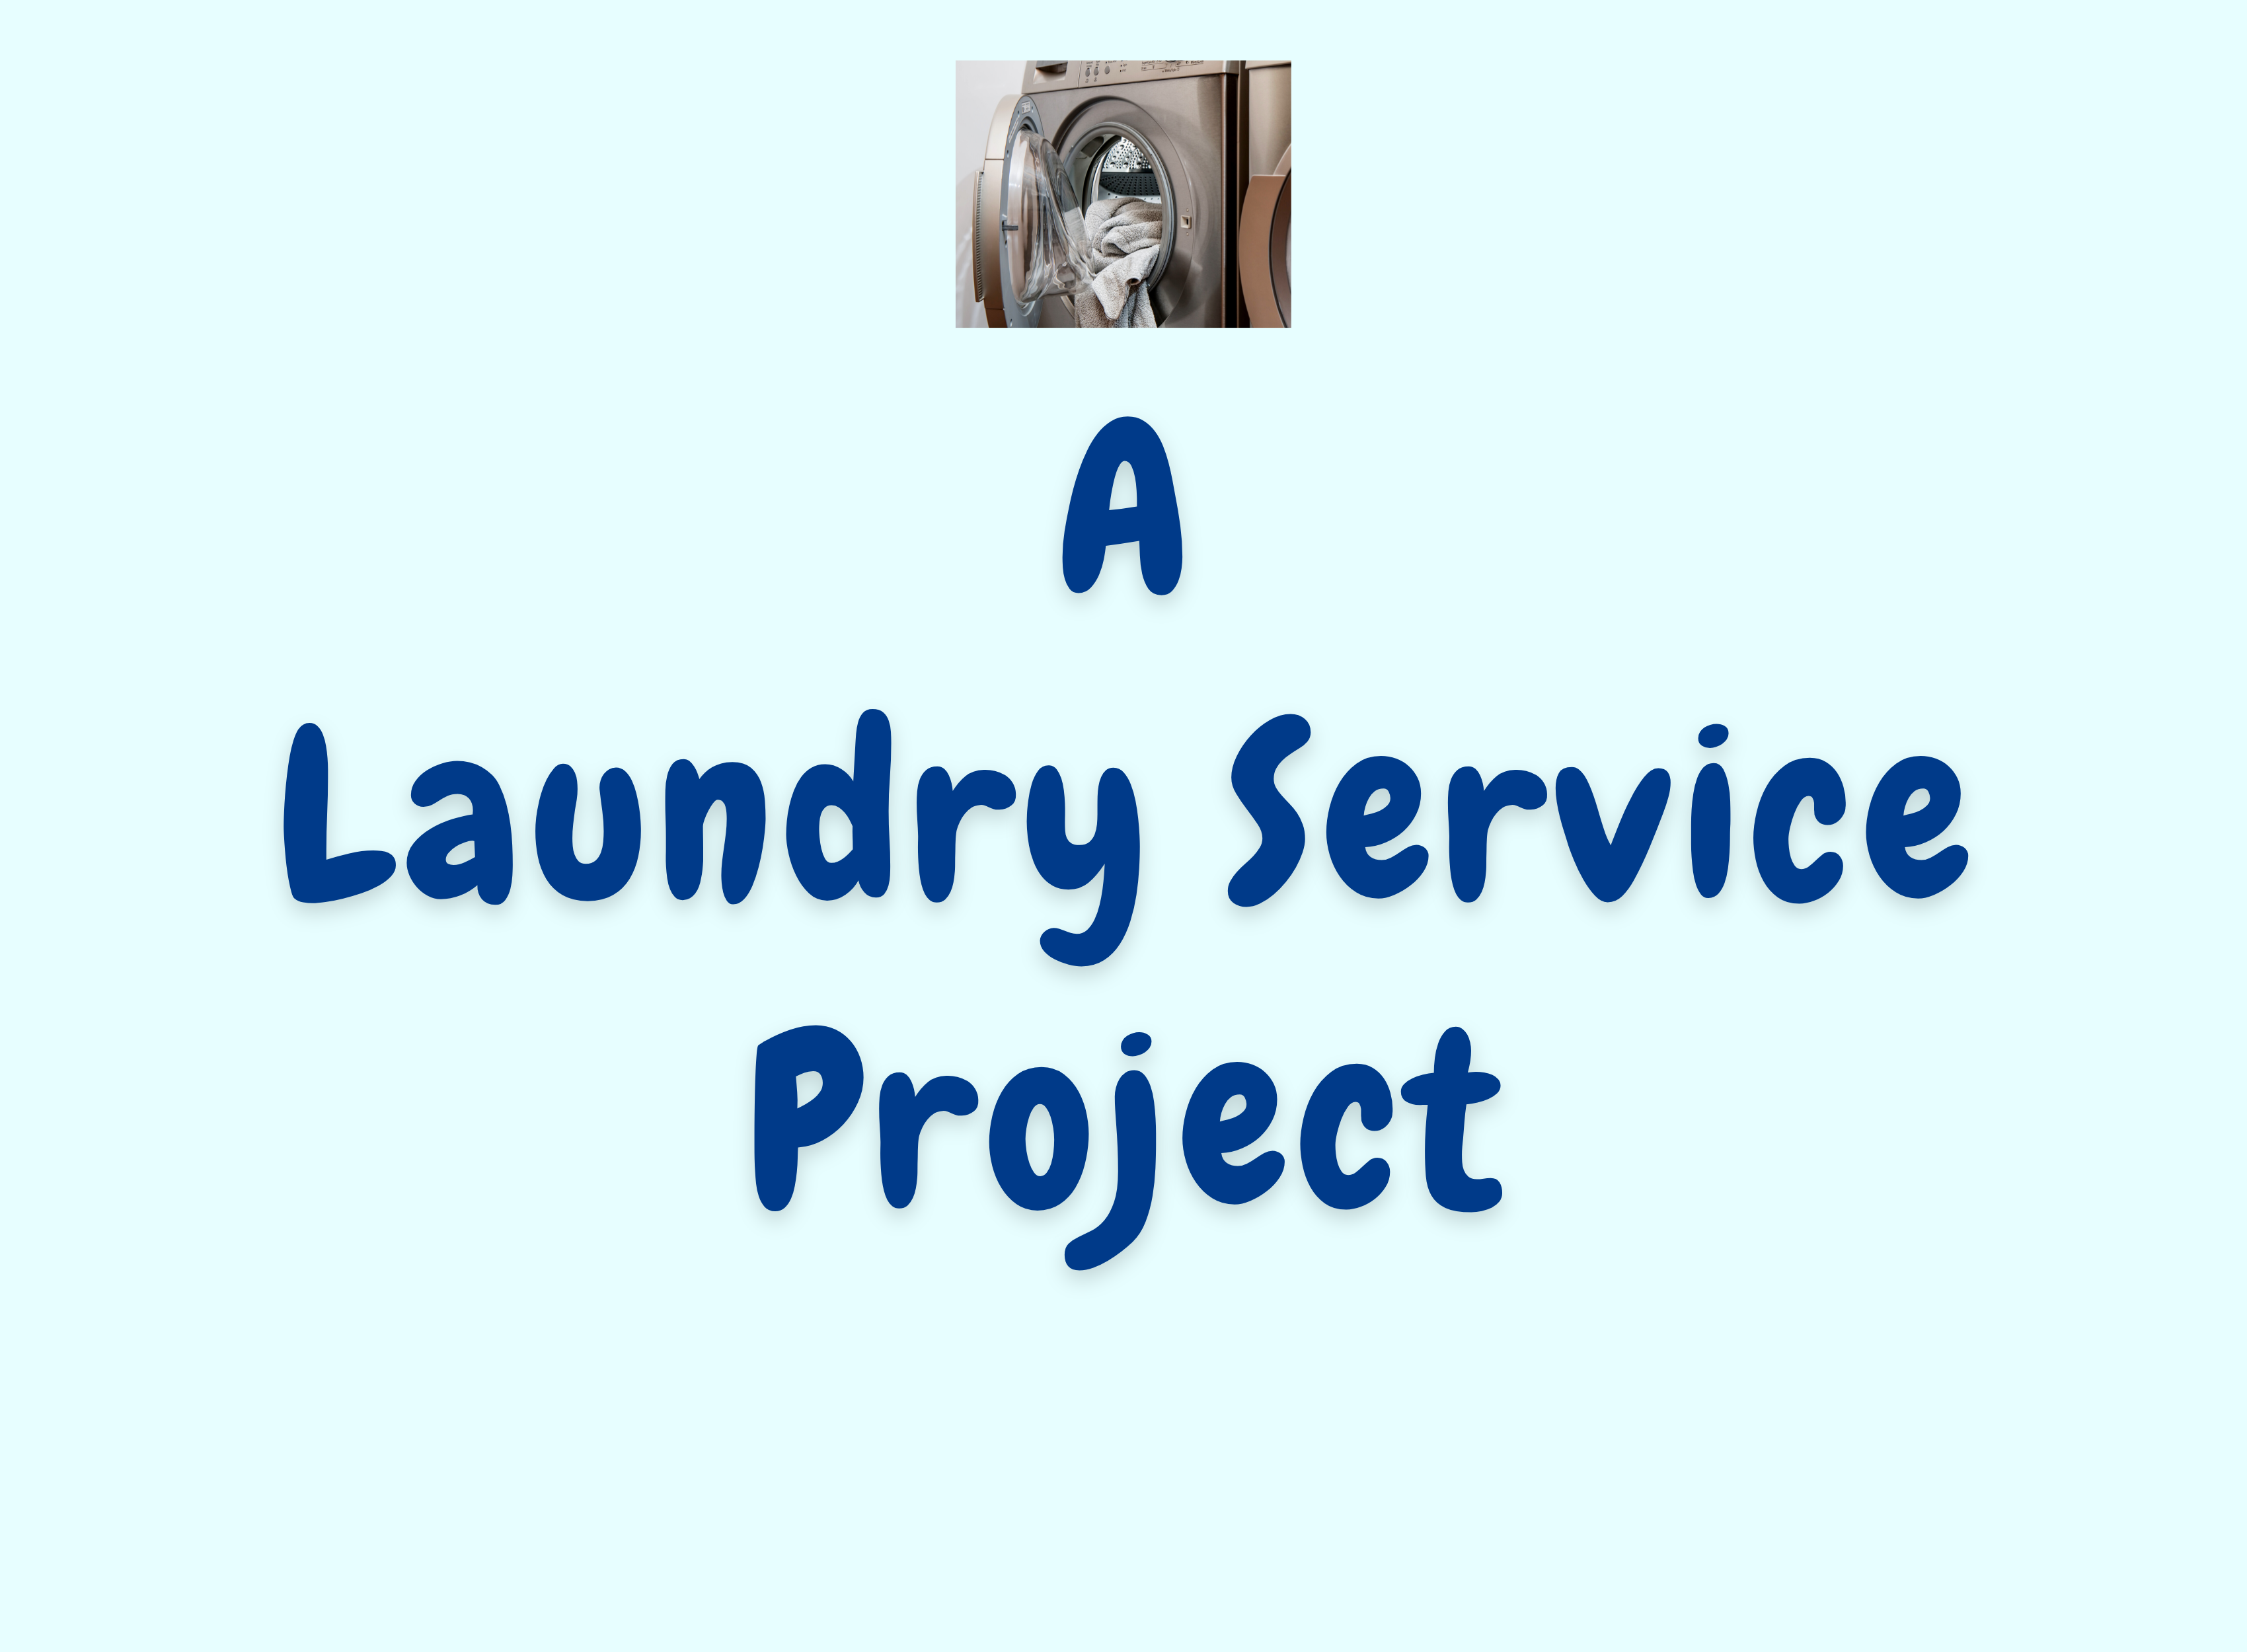 Laundry Service Project